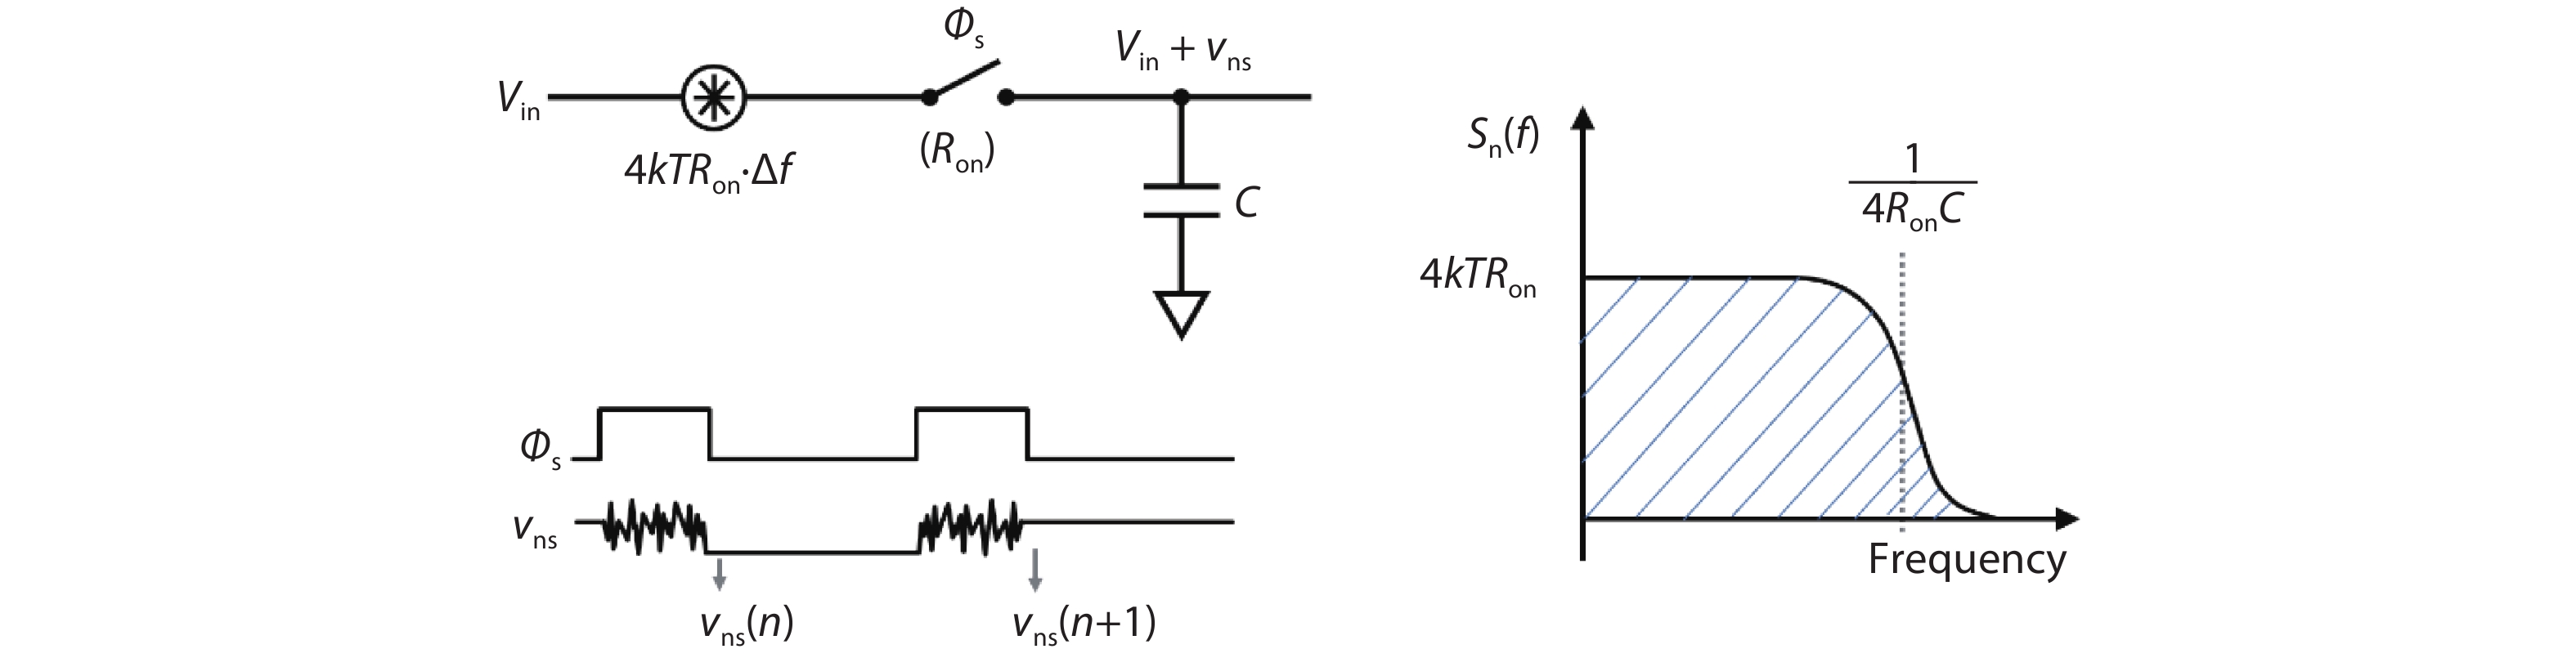 A sampling circuit with kT/C noise.